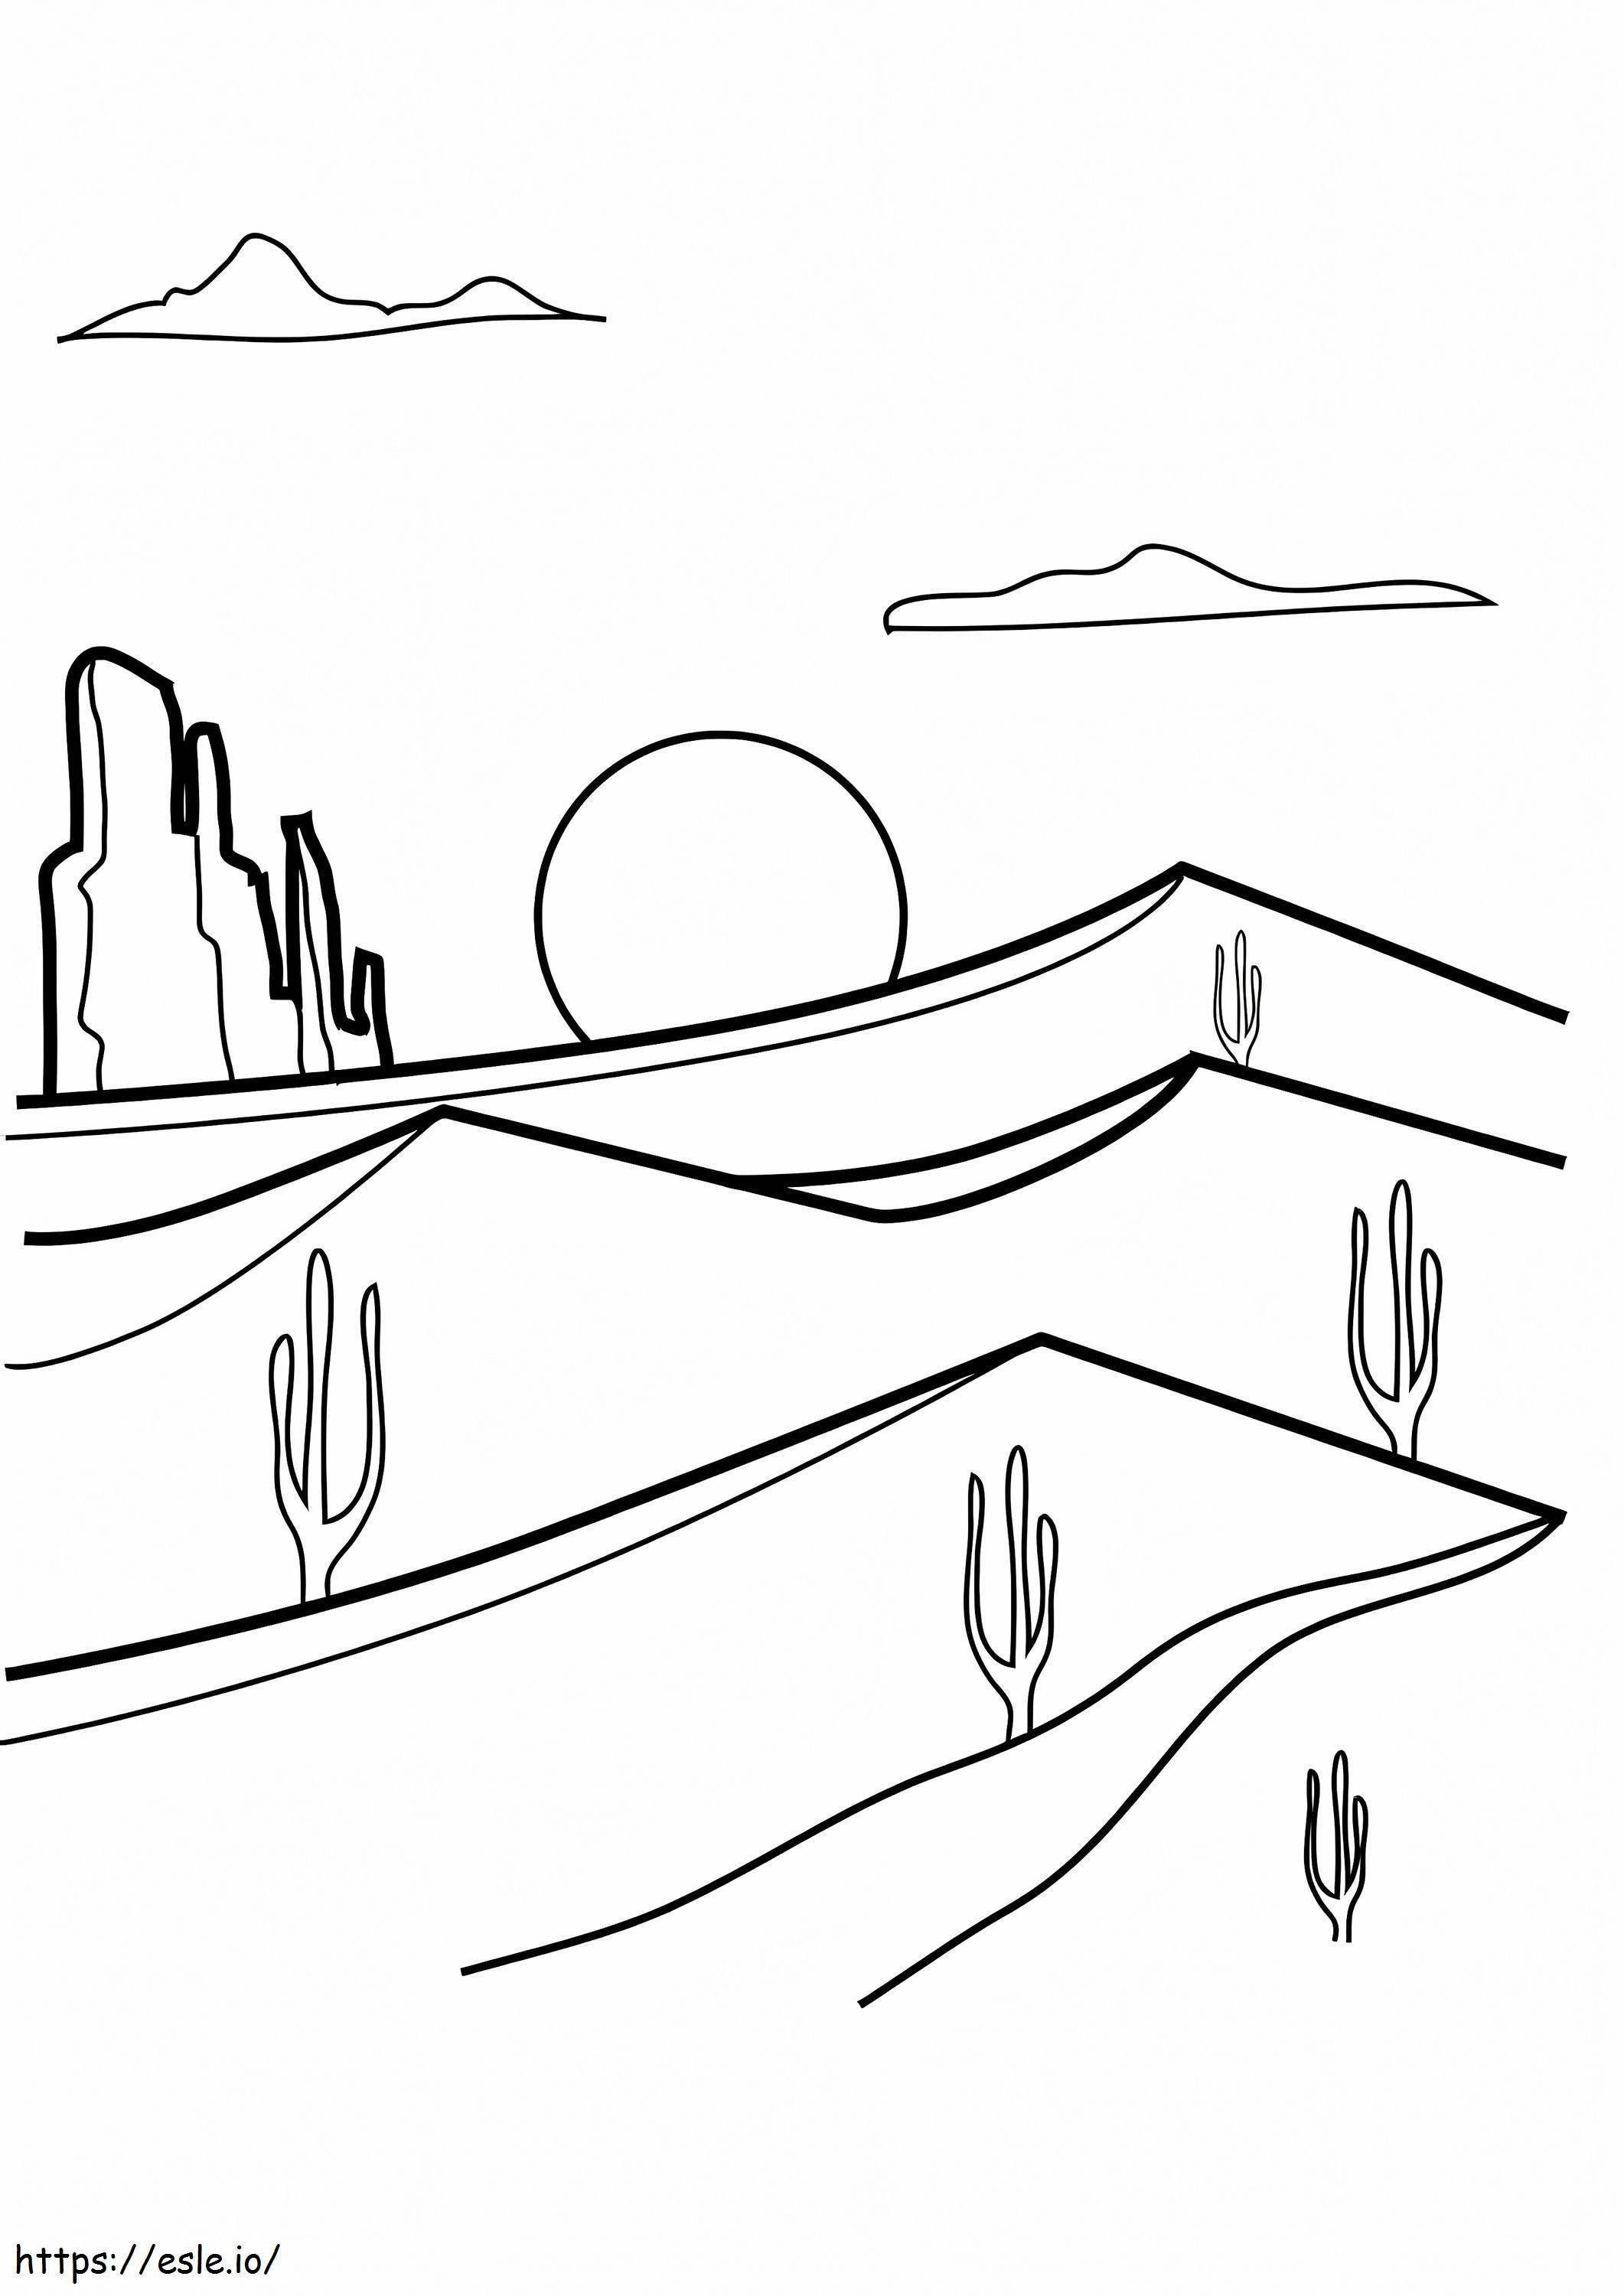 Desert Scenery coloring page